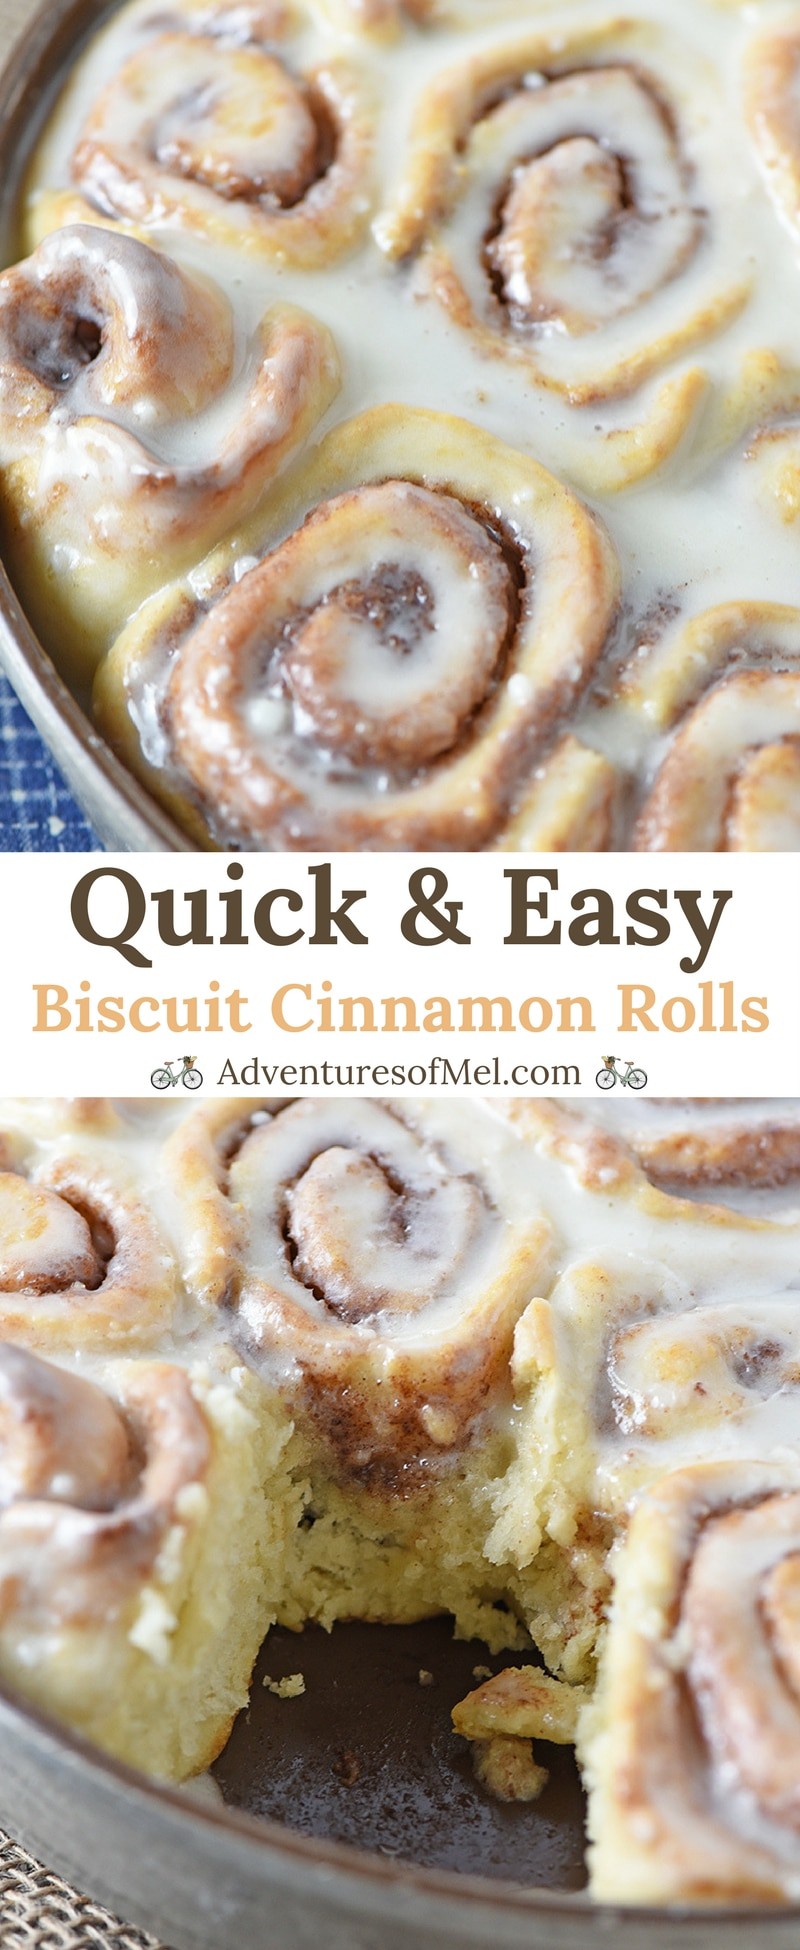 Biscuit Cinnamon Rolls are quick, easy to make, and no rise too! Deliciously sweet and irresistible, ooey gooey, homemade breakfast treats.